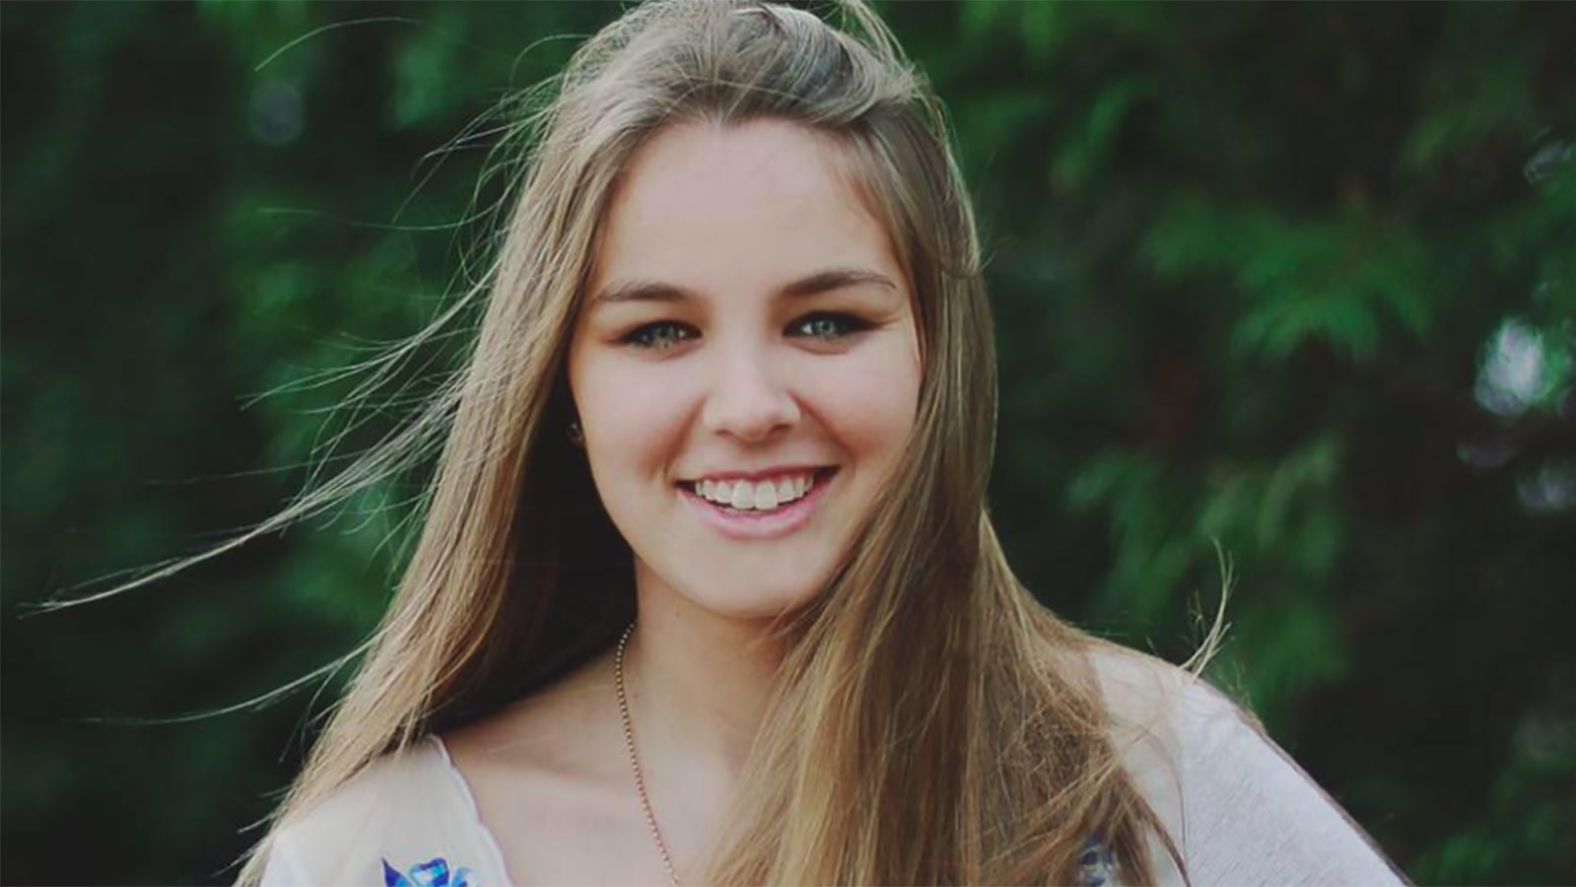 Saoirse Kennedy Hill <a href="index.php?page=&url=https%3A%2F%2Fwww.cnn.com%2F2019%2F08%2F01%2Fus%2Fkennedy-compound-emergency%2Findex.html" target="_blank">died in August 2019</a> at the family home in Hyannis Port, Massachusetts. Her mother, Courtney Kennedy Hill, was one of the 11 children of the late Robert F. Kennedy and his human rights activist wife, Ethel Kennedy.